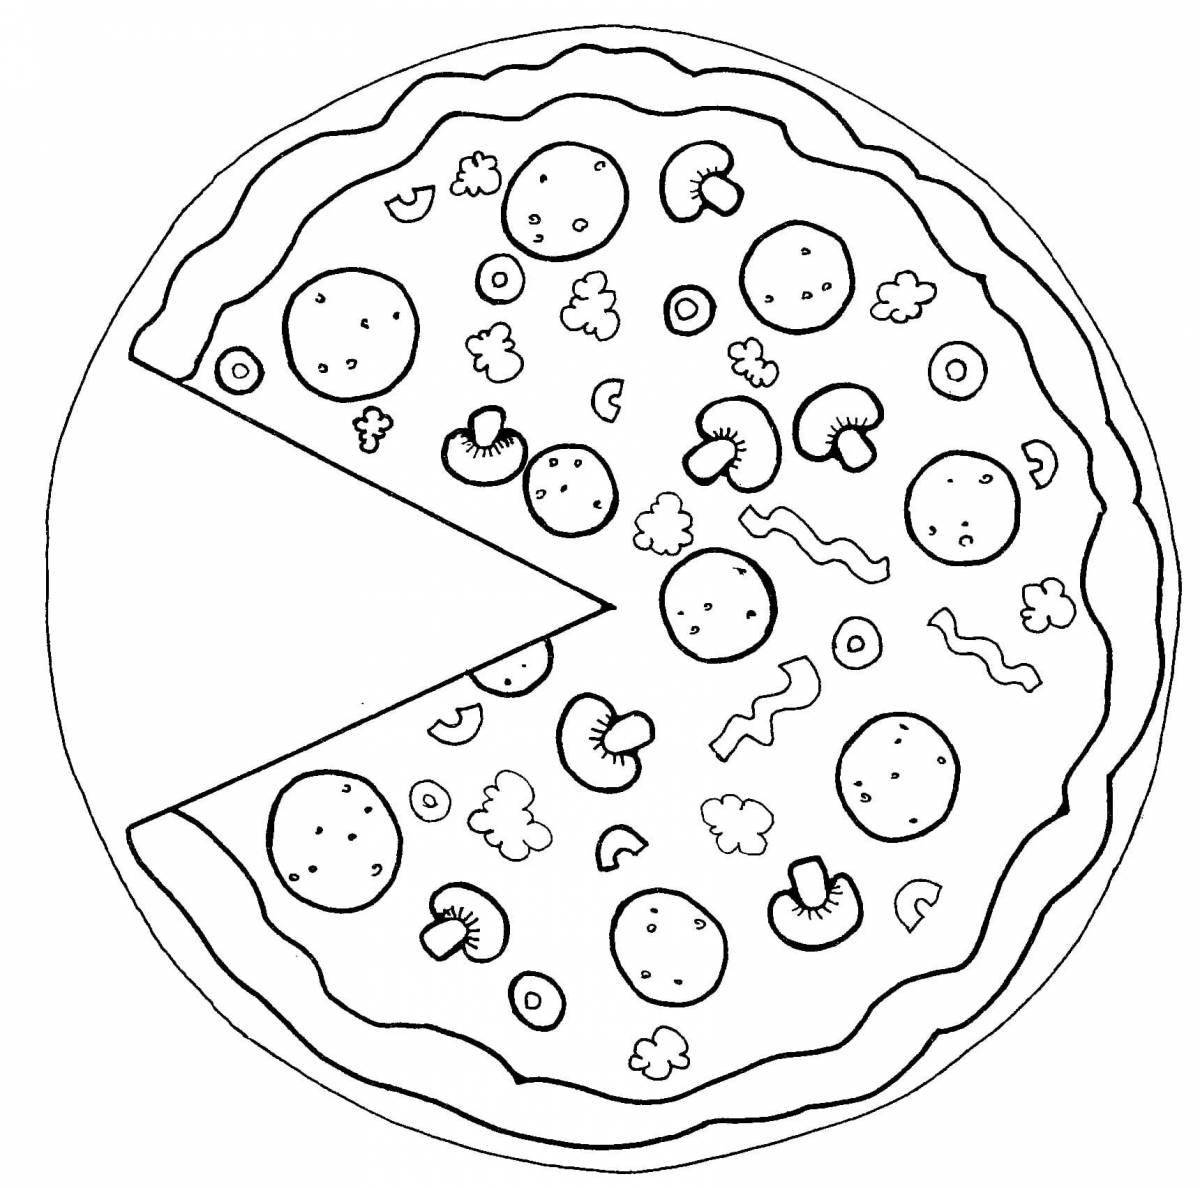 Drawing of juicy pizza